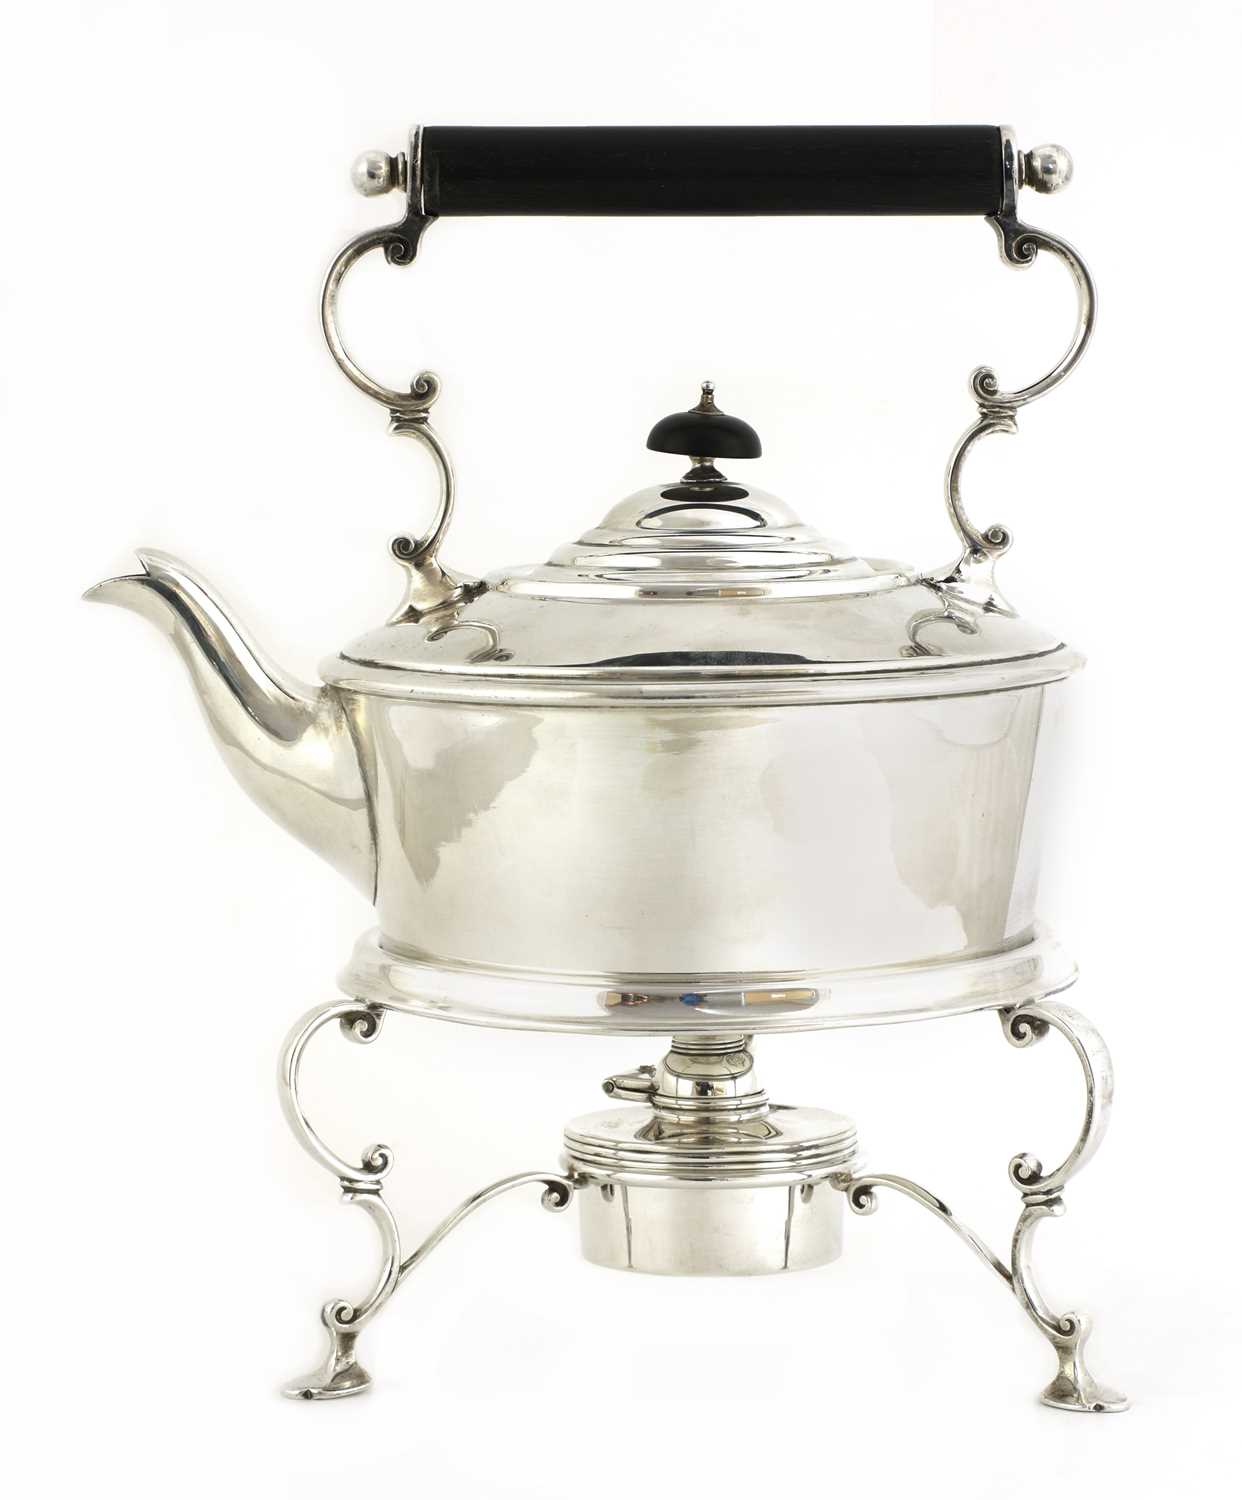 Lot 500 - An Edwardian silver kettle, stand and burner